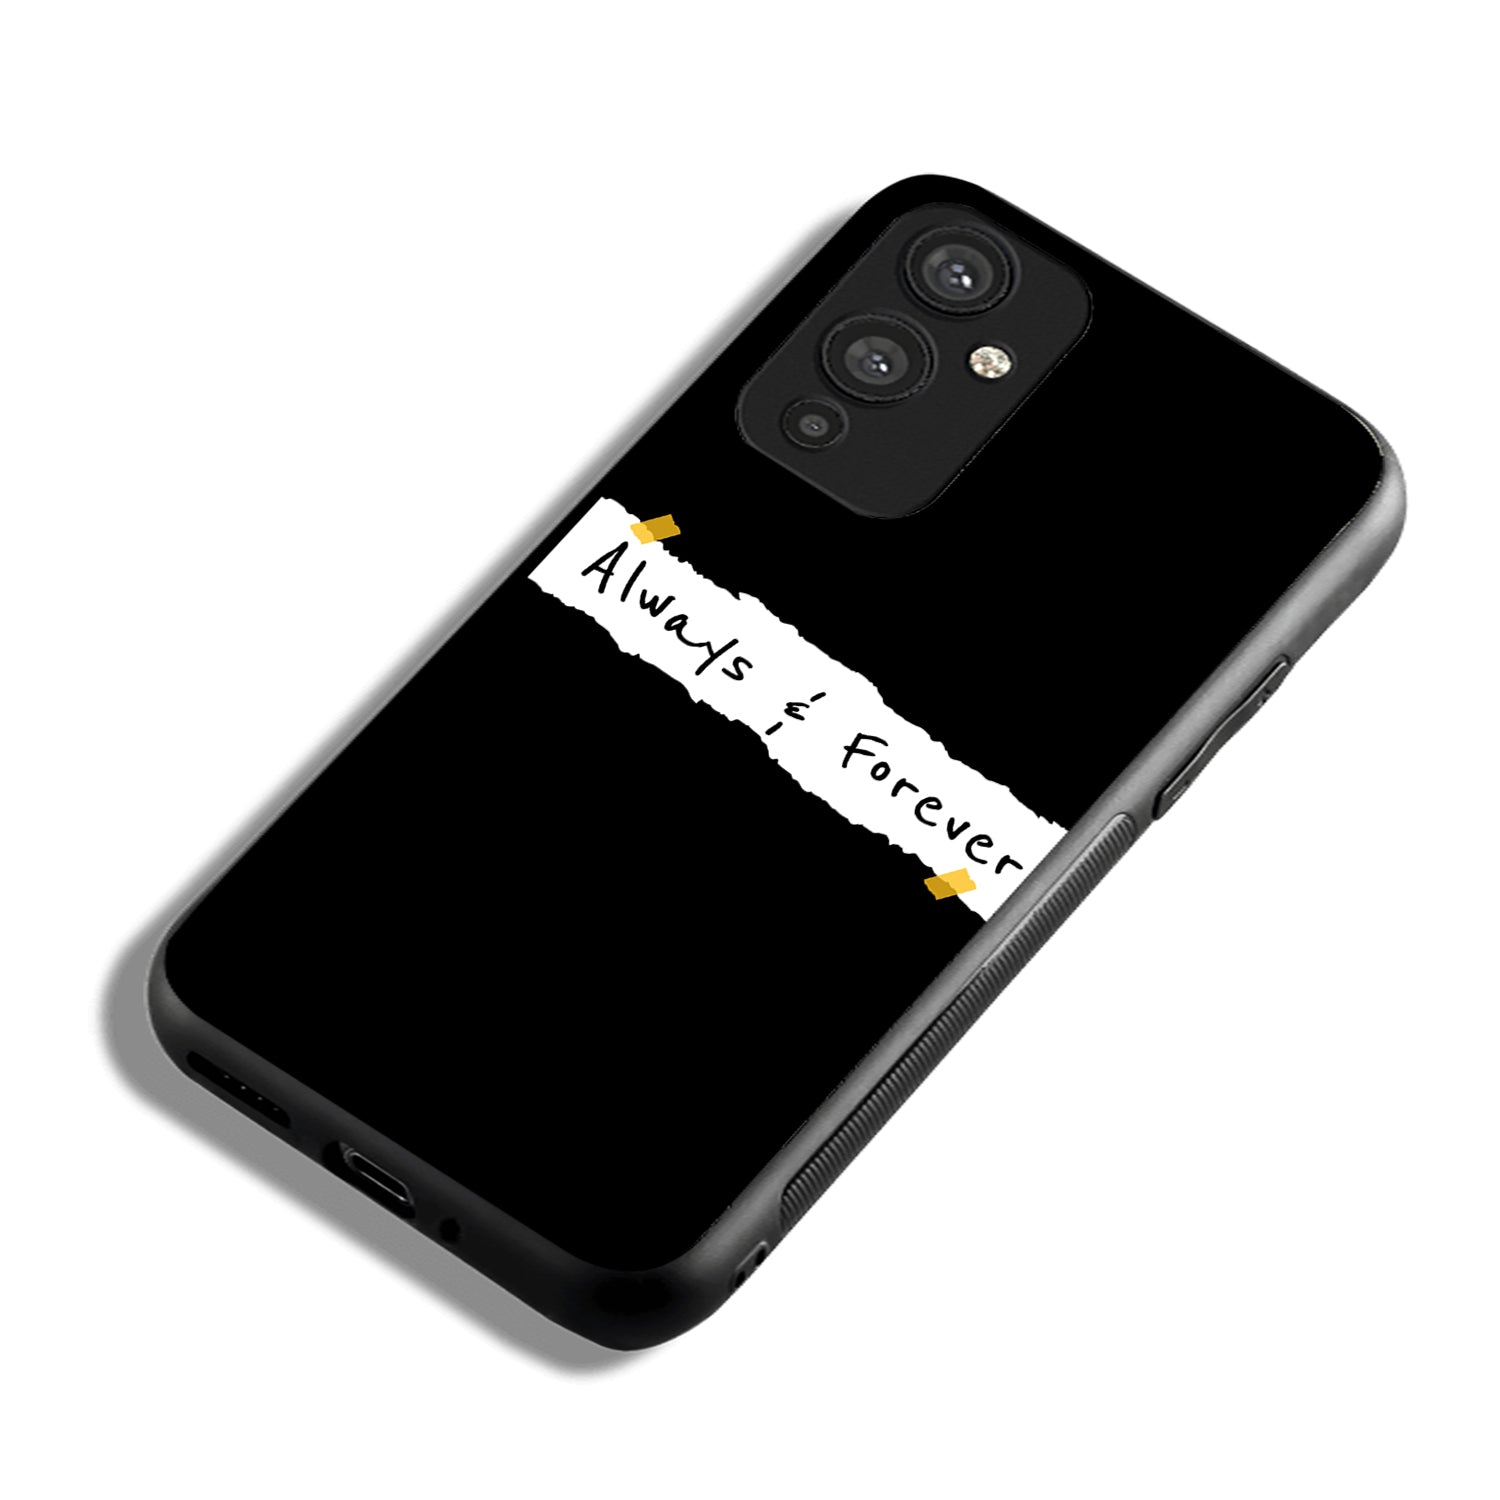 Always And Forever Bff Oneplus 9 Back Case